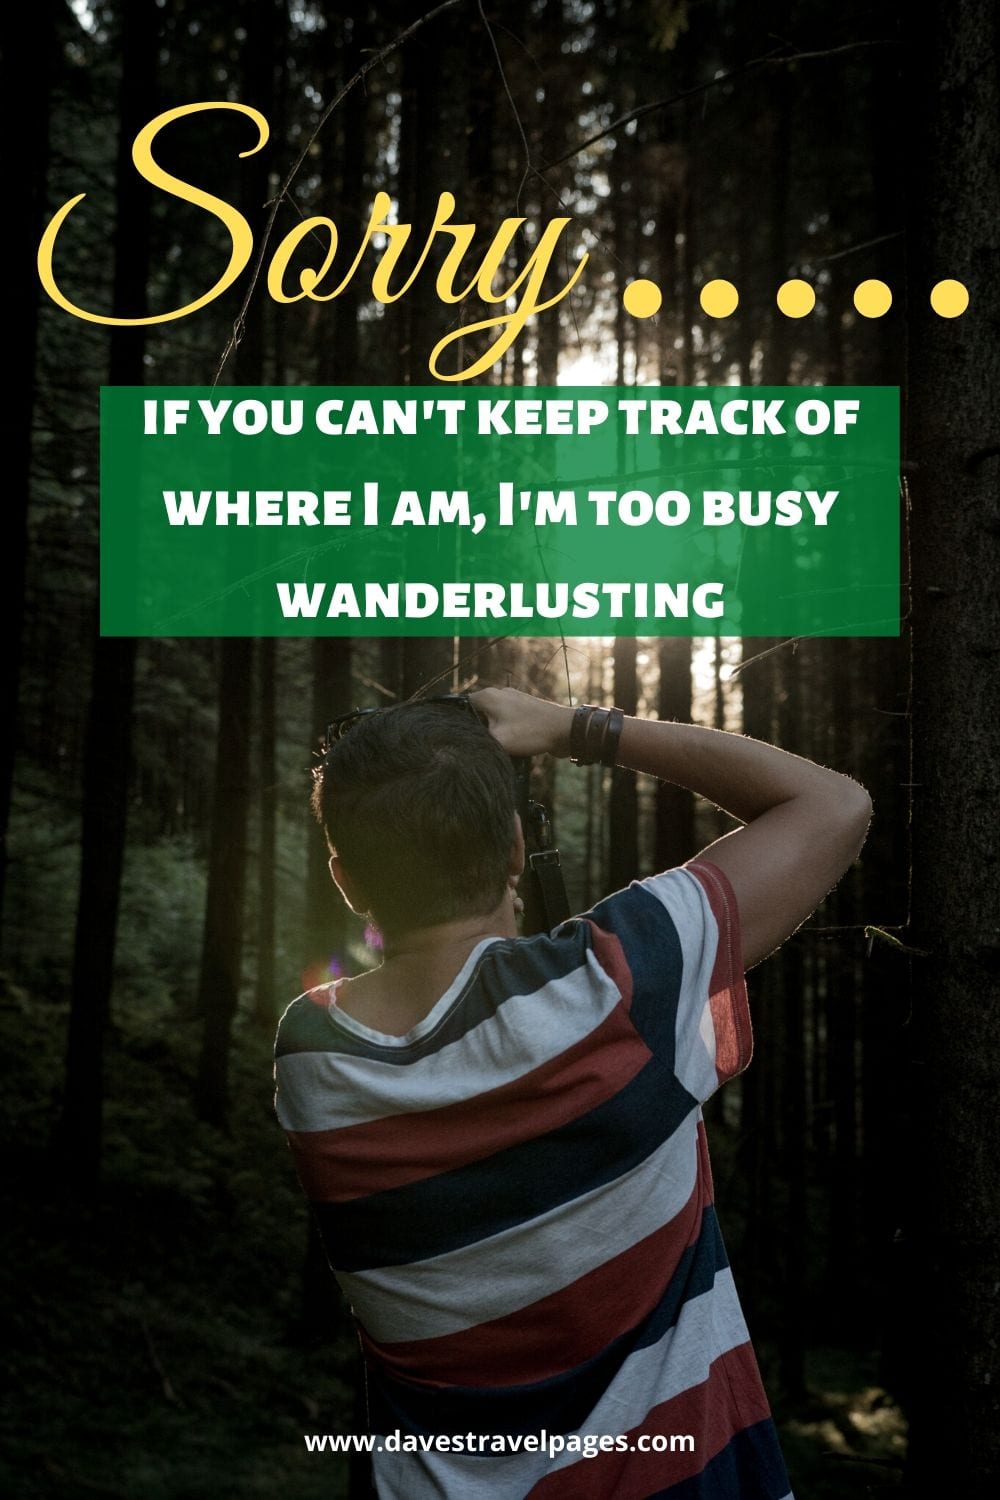 Wanderlust captions: "Sorry if you can't keep track of where I am, I'm too busy wanderlusting."